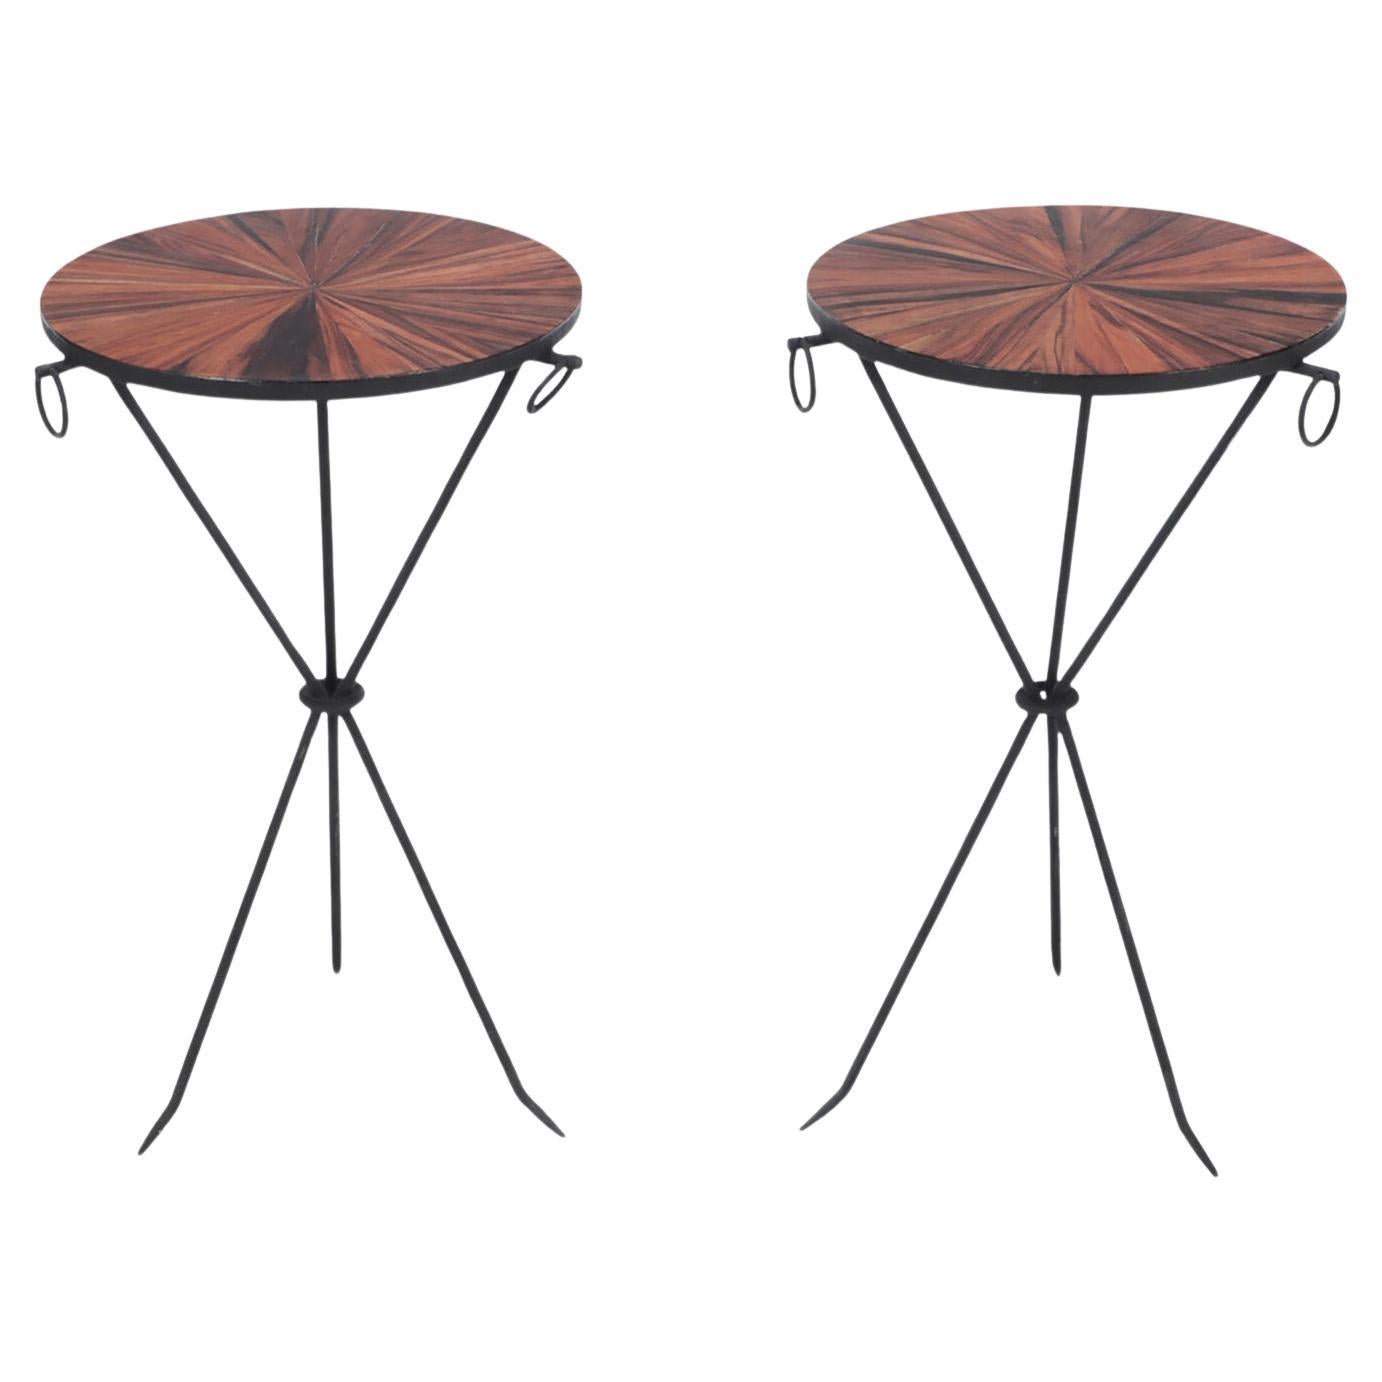 Pair of Contemporary Wrought Iron Drink Tables with Rosewood Tops